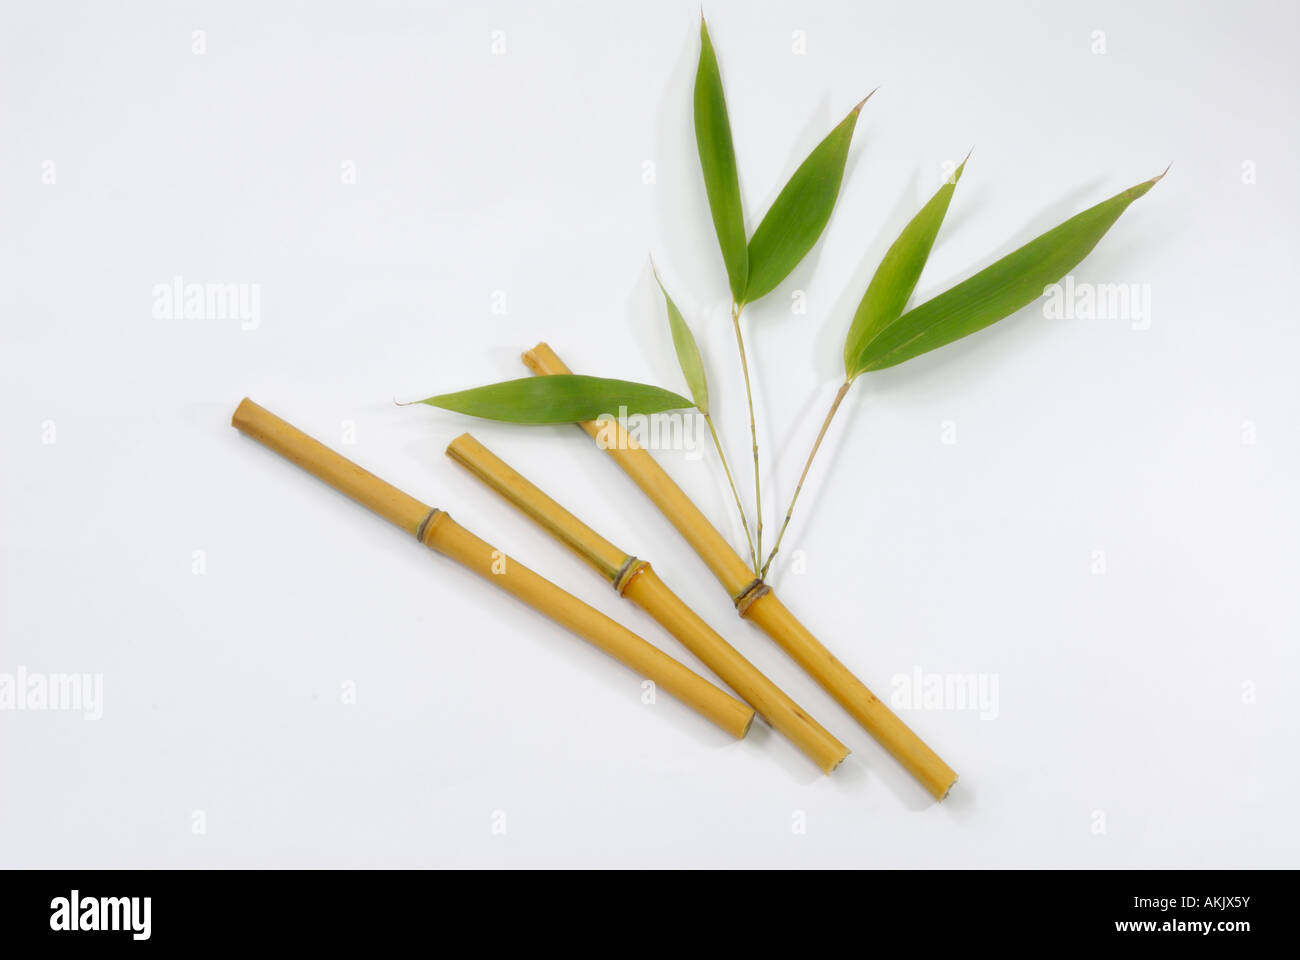 Bamboo (Bambusa sp.), stem with leaves, studio picture Stock Photo